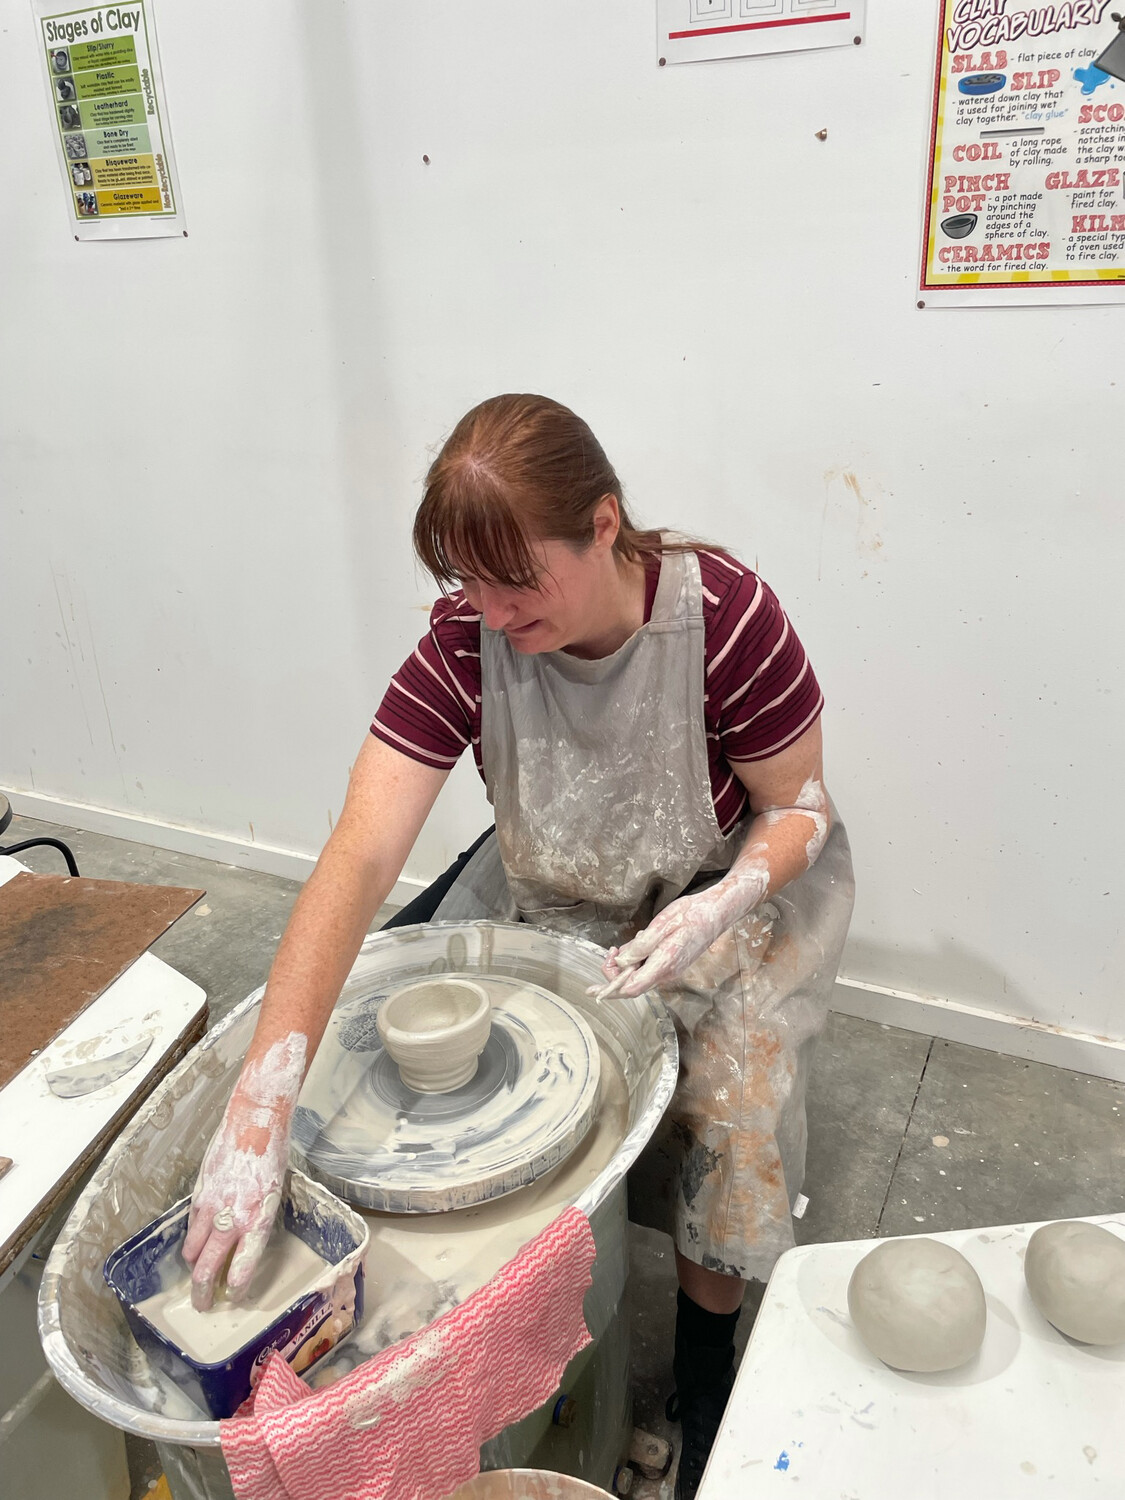 Slip, Spin & Sculpt! 4 week Pottery course Saturday 13th August 2-4pm